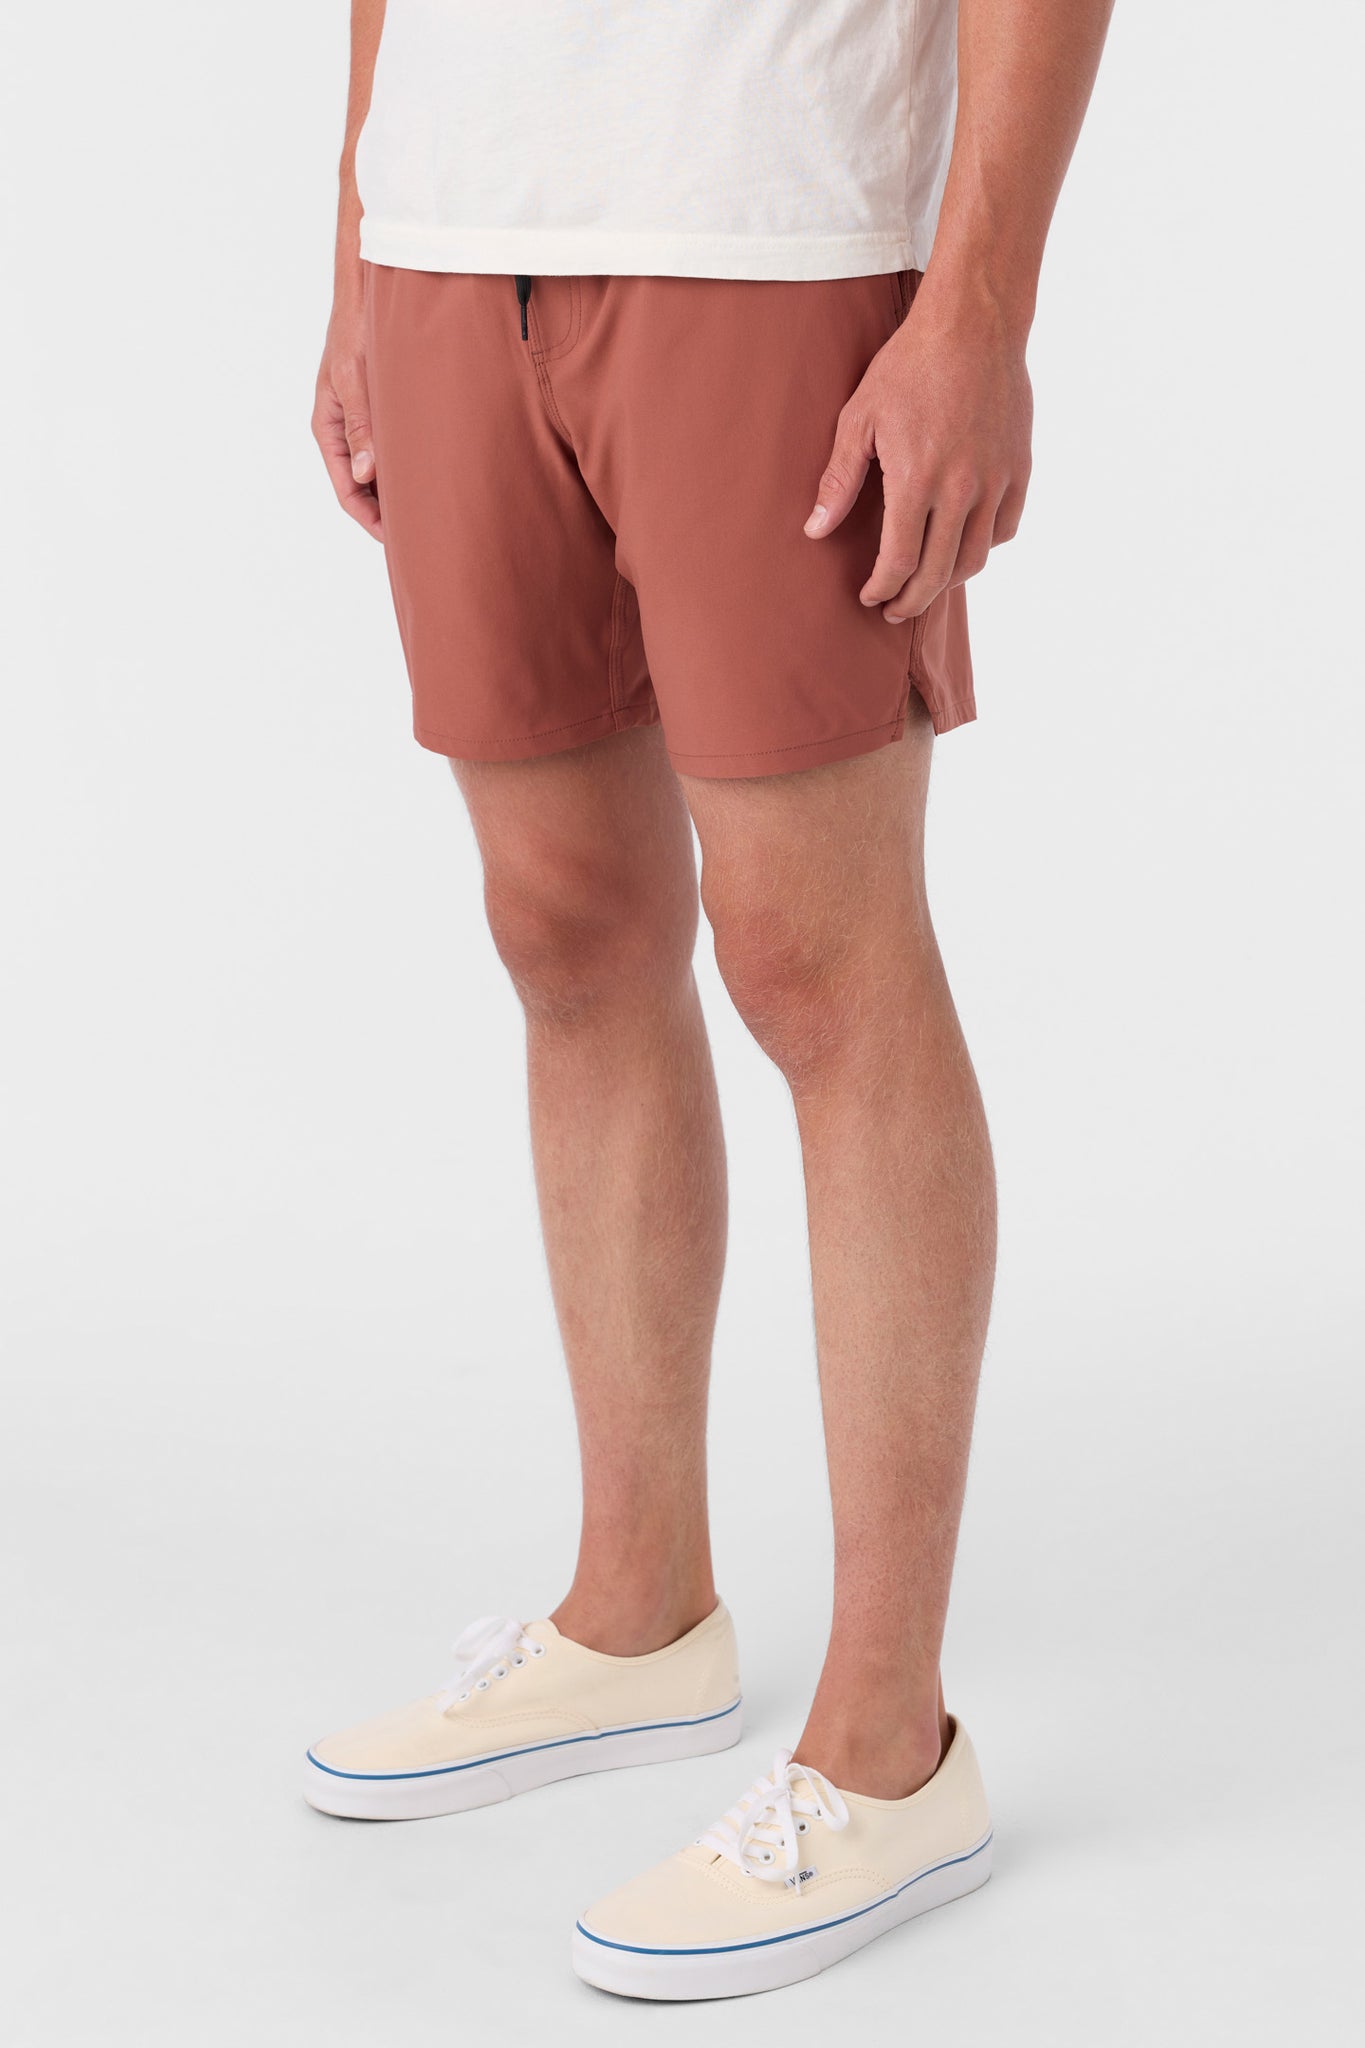 PERFORM LINED 17" ATHLETIC SHORTS